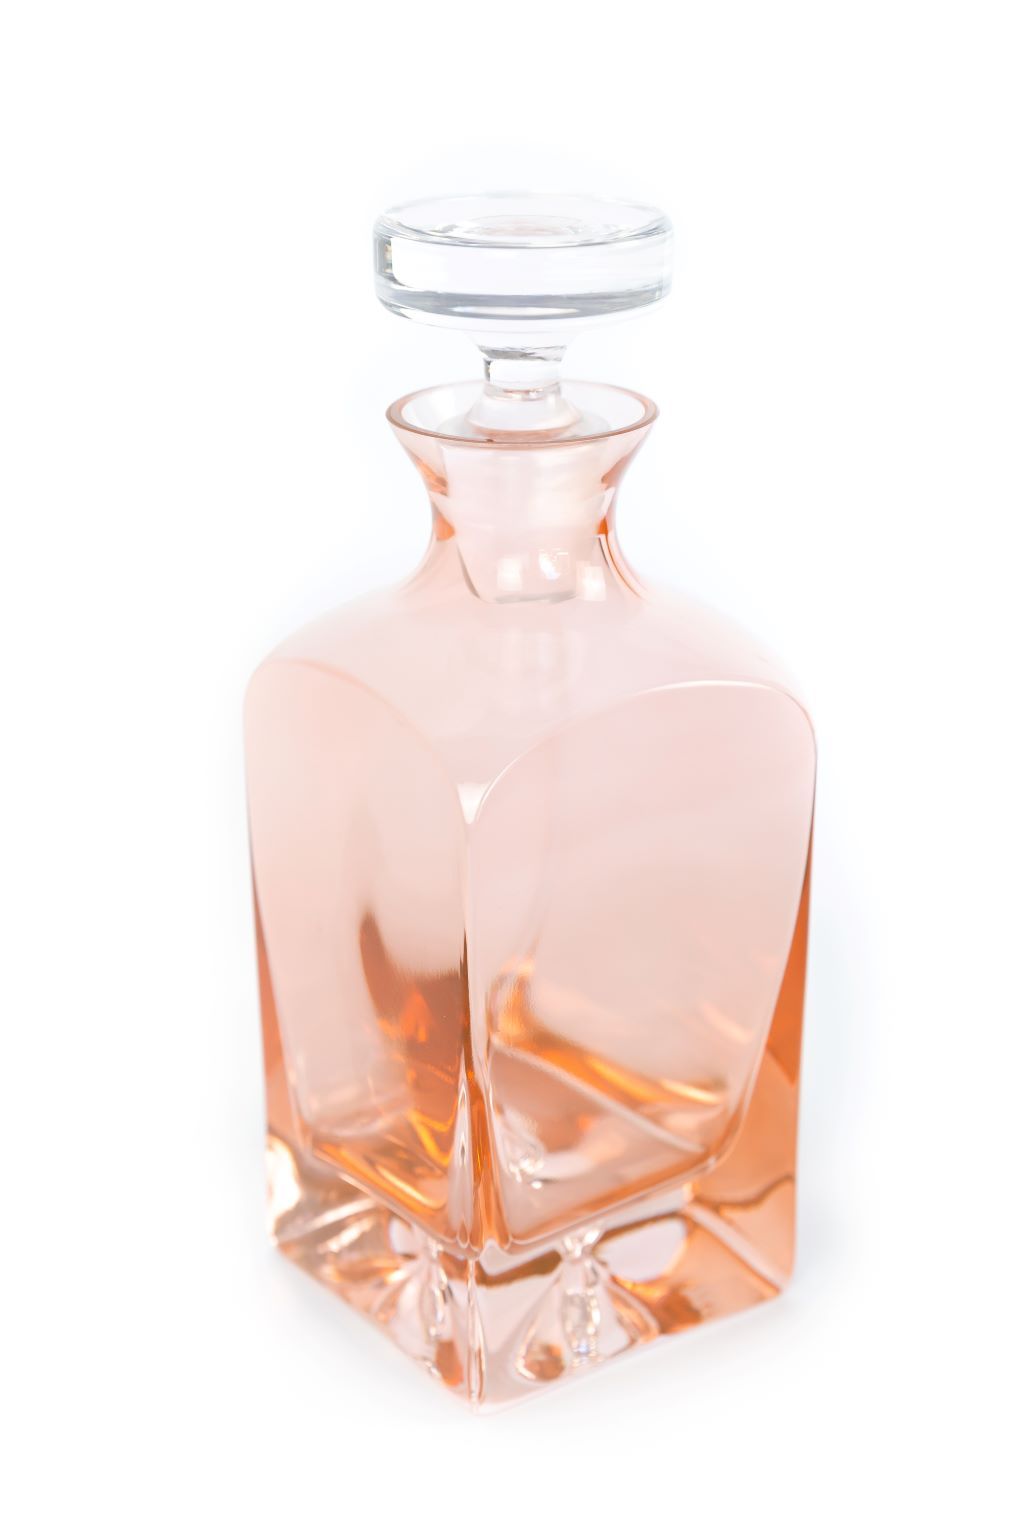 Decanter in Blush Pink